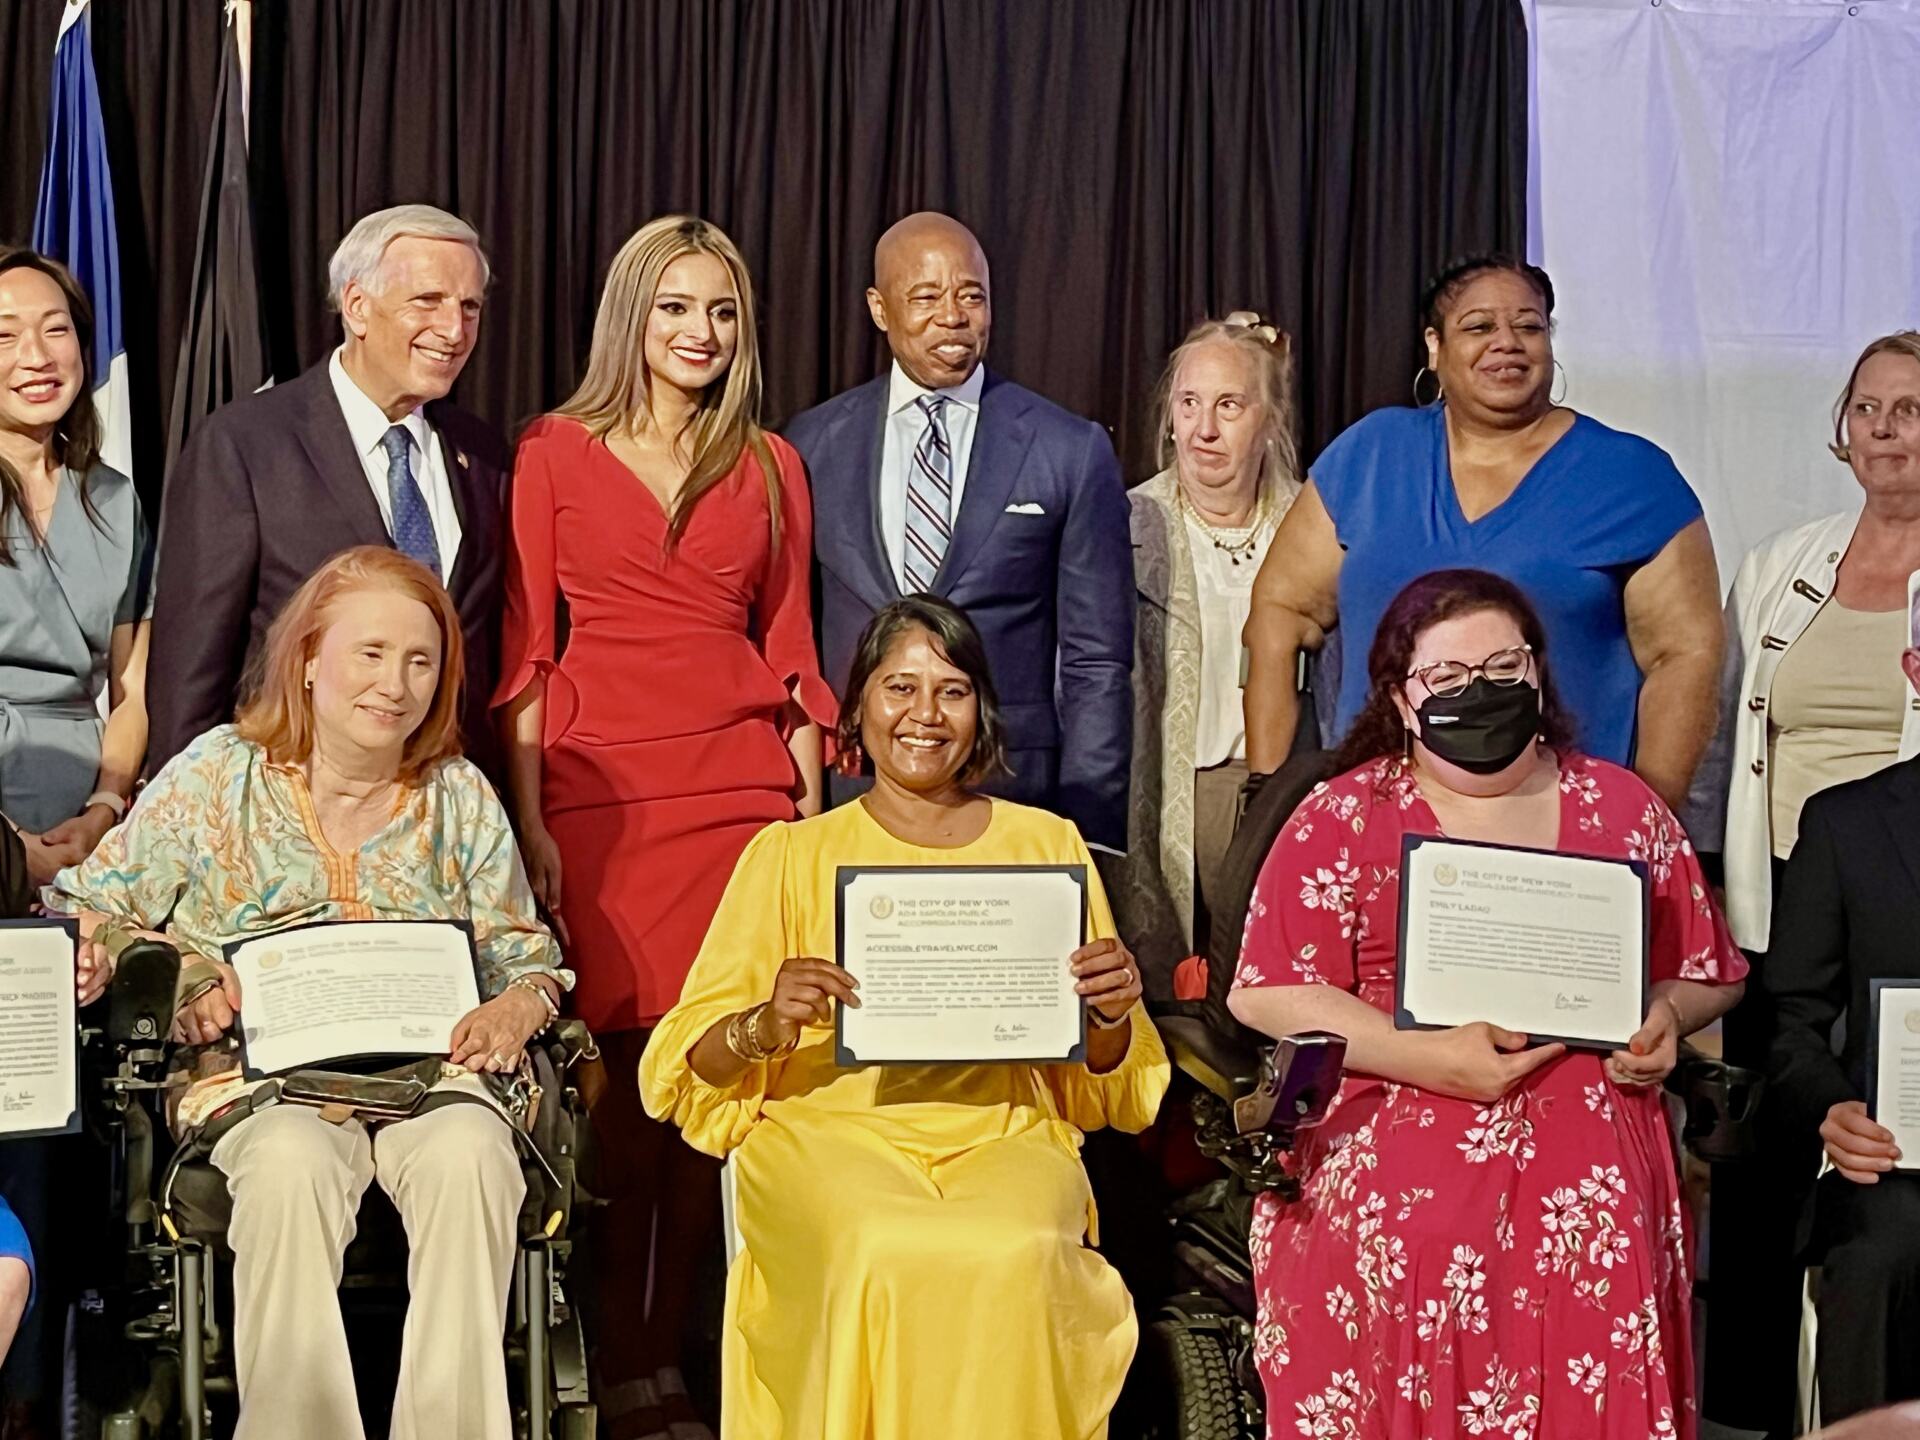 On a stage, three of the awardees, Kim Hill, Emily Ladau and myself holding our certificates. There are several government officials behind us including Mayor Adams.